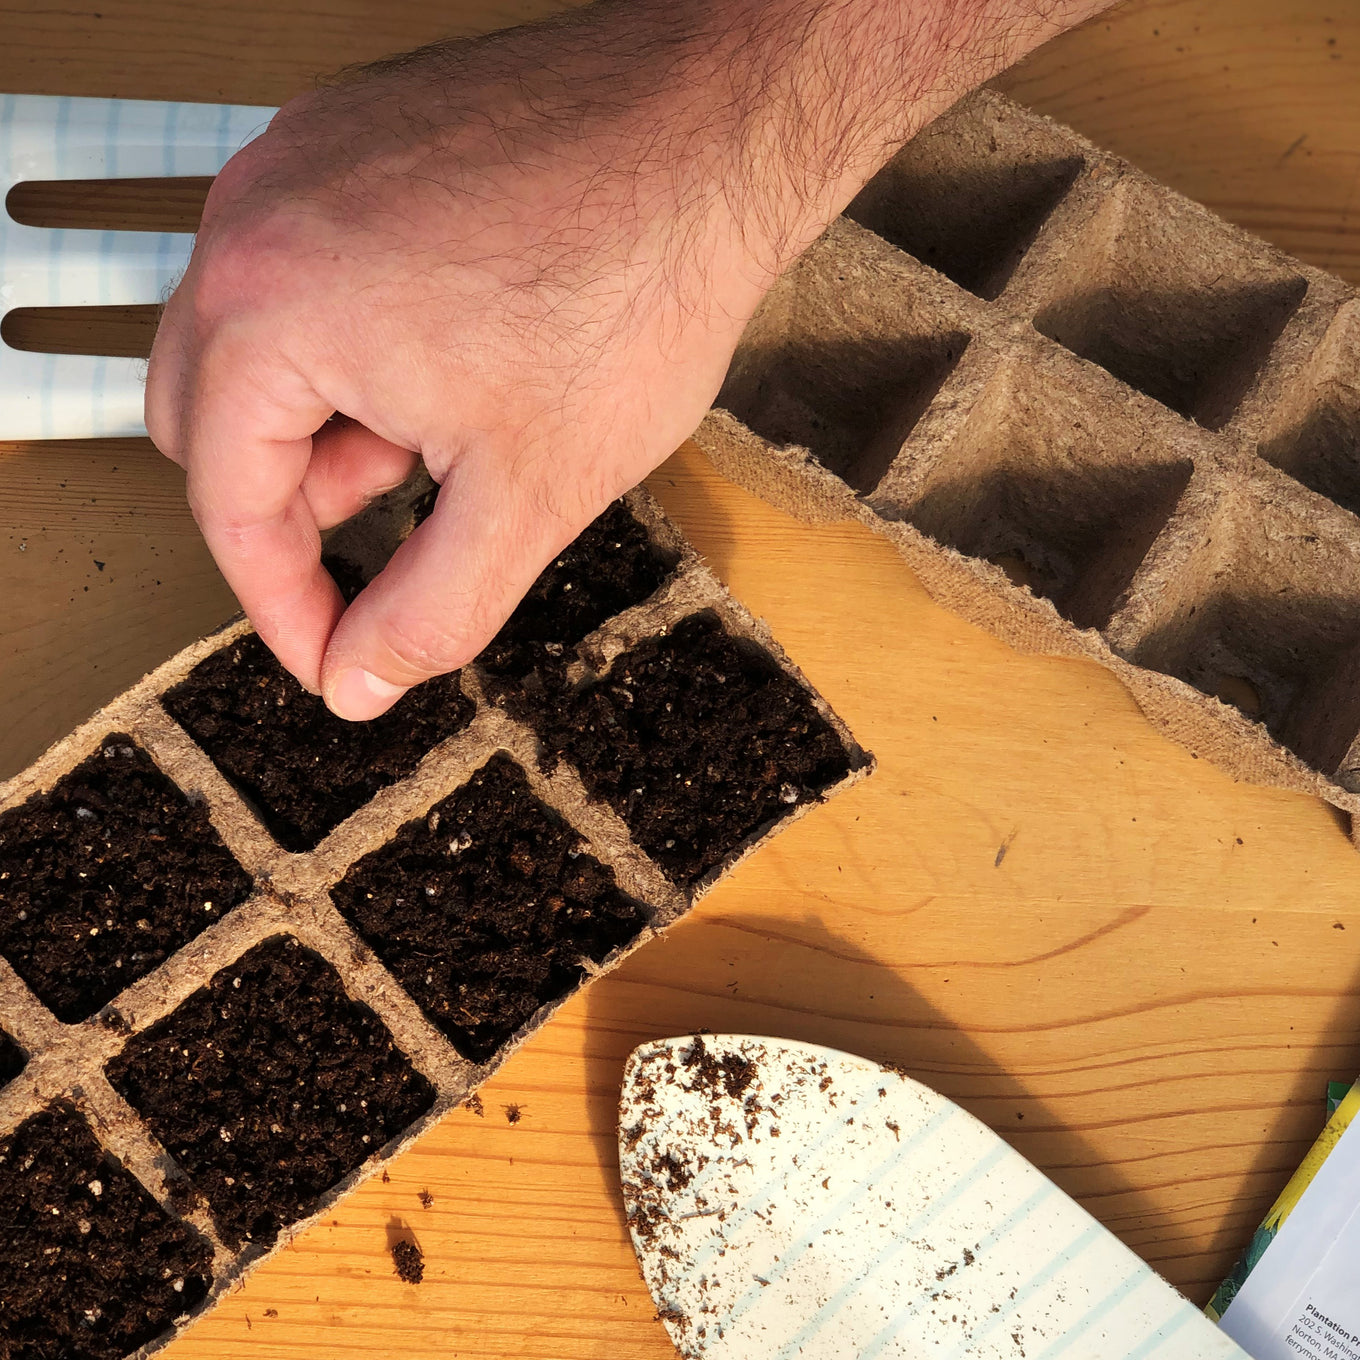 Sowing Supersweet 100 Tomato seeds into Jiffy peat strip trays filled with sowing mix.